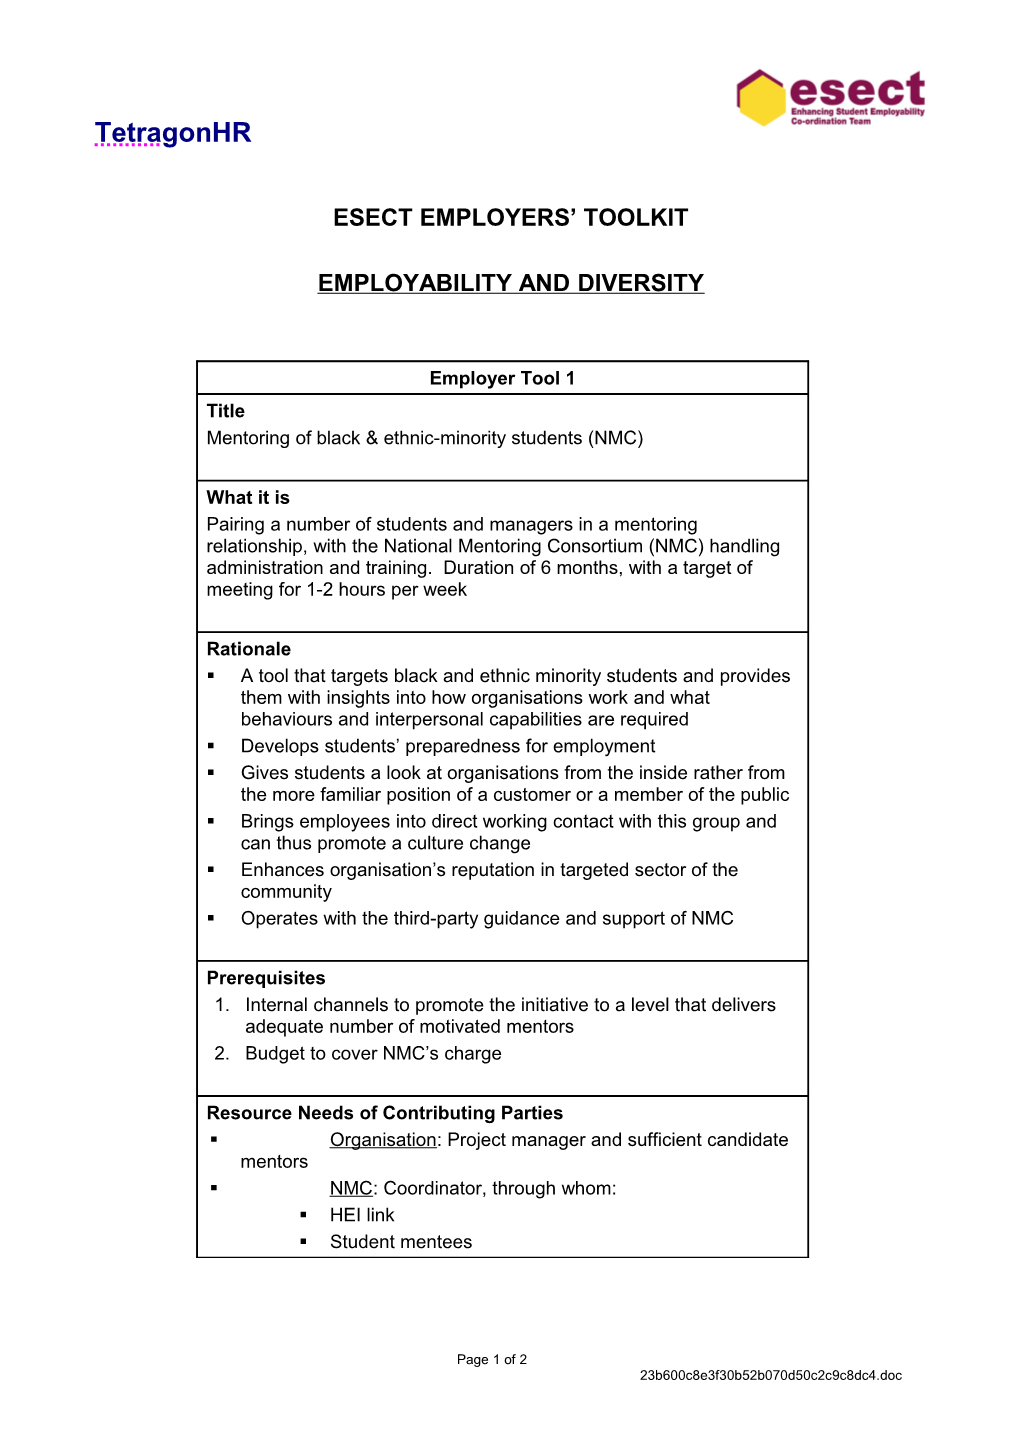 Employability & Diversity a Toolkit for Employers